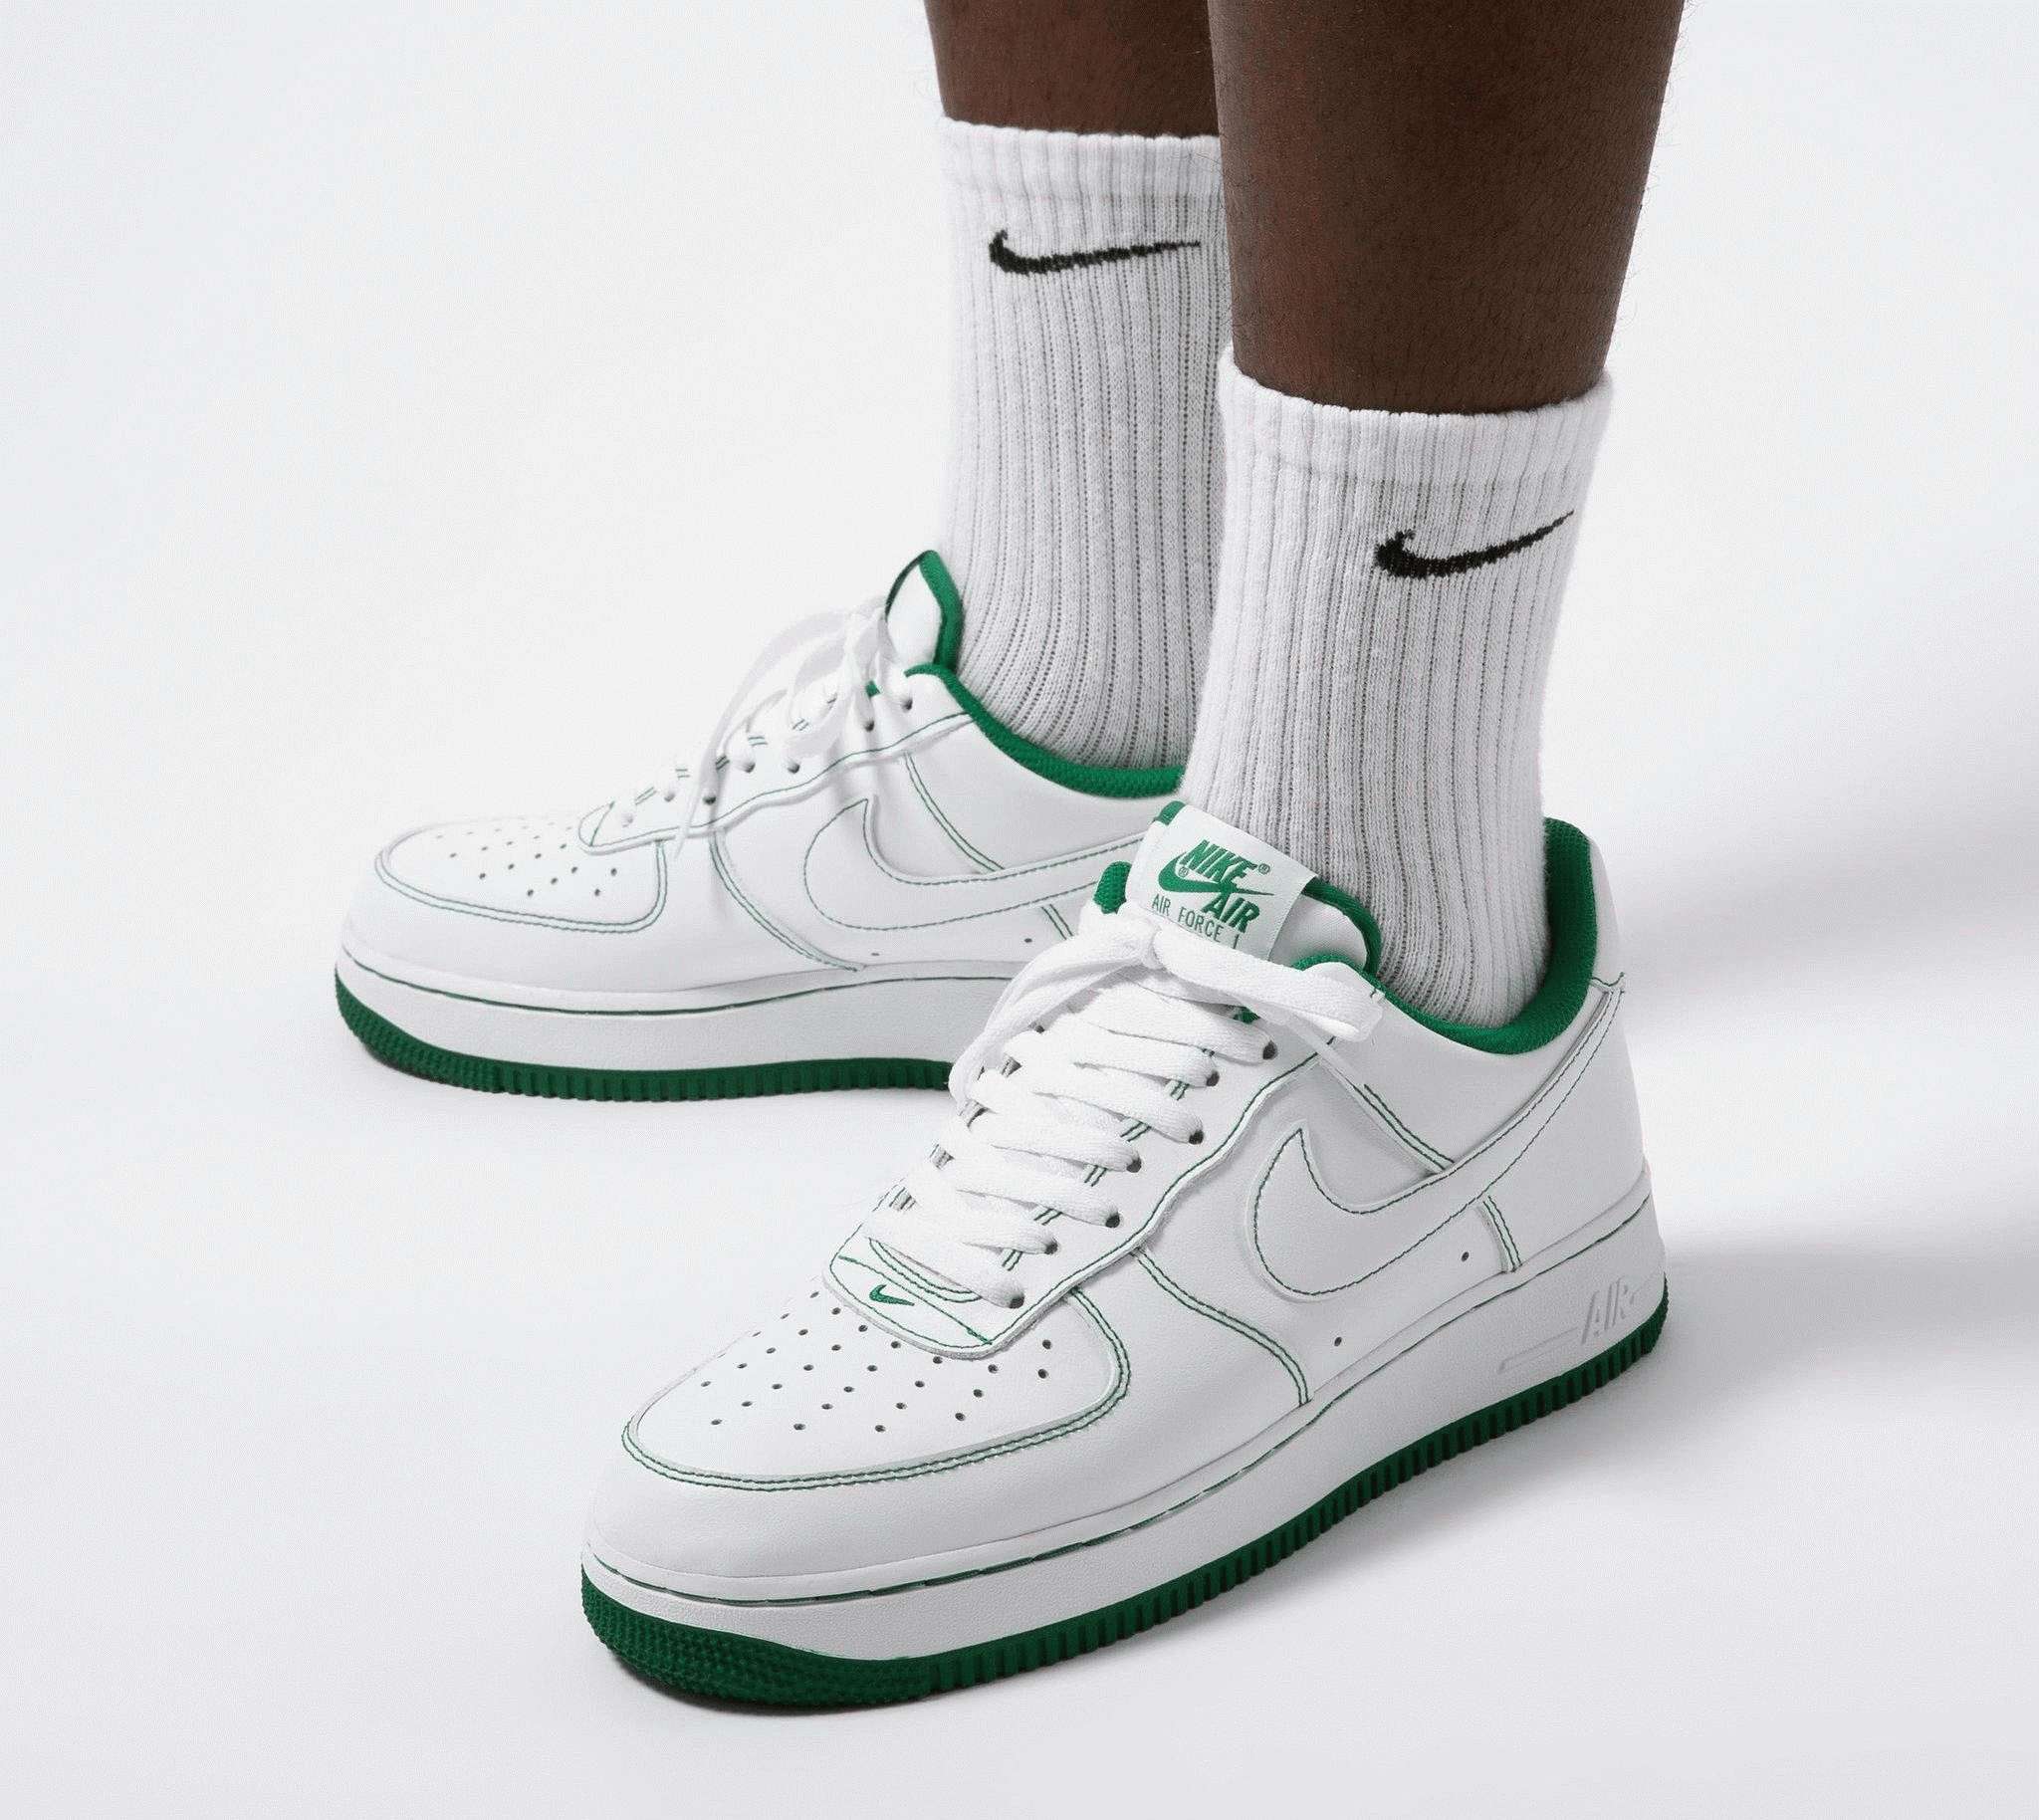 NK Air Force One Low White Pine Green on feet look